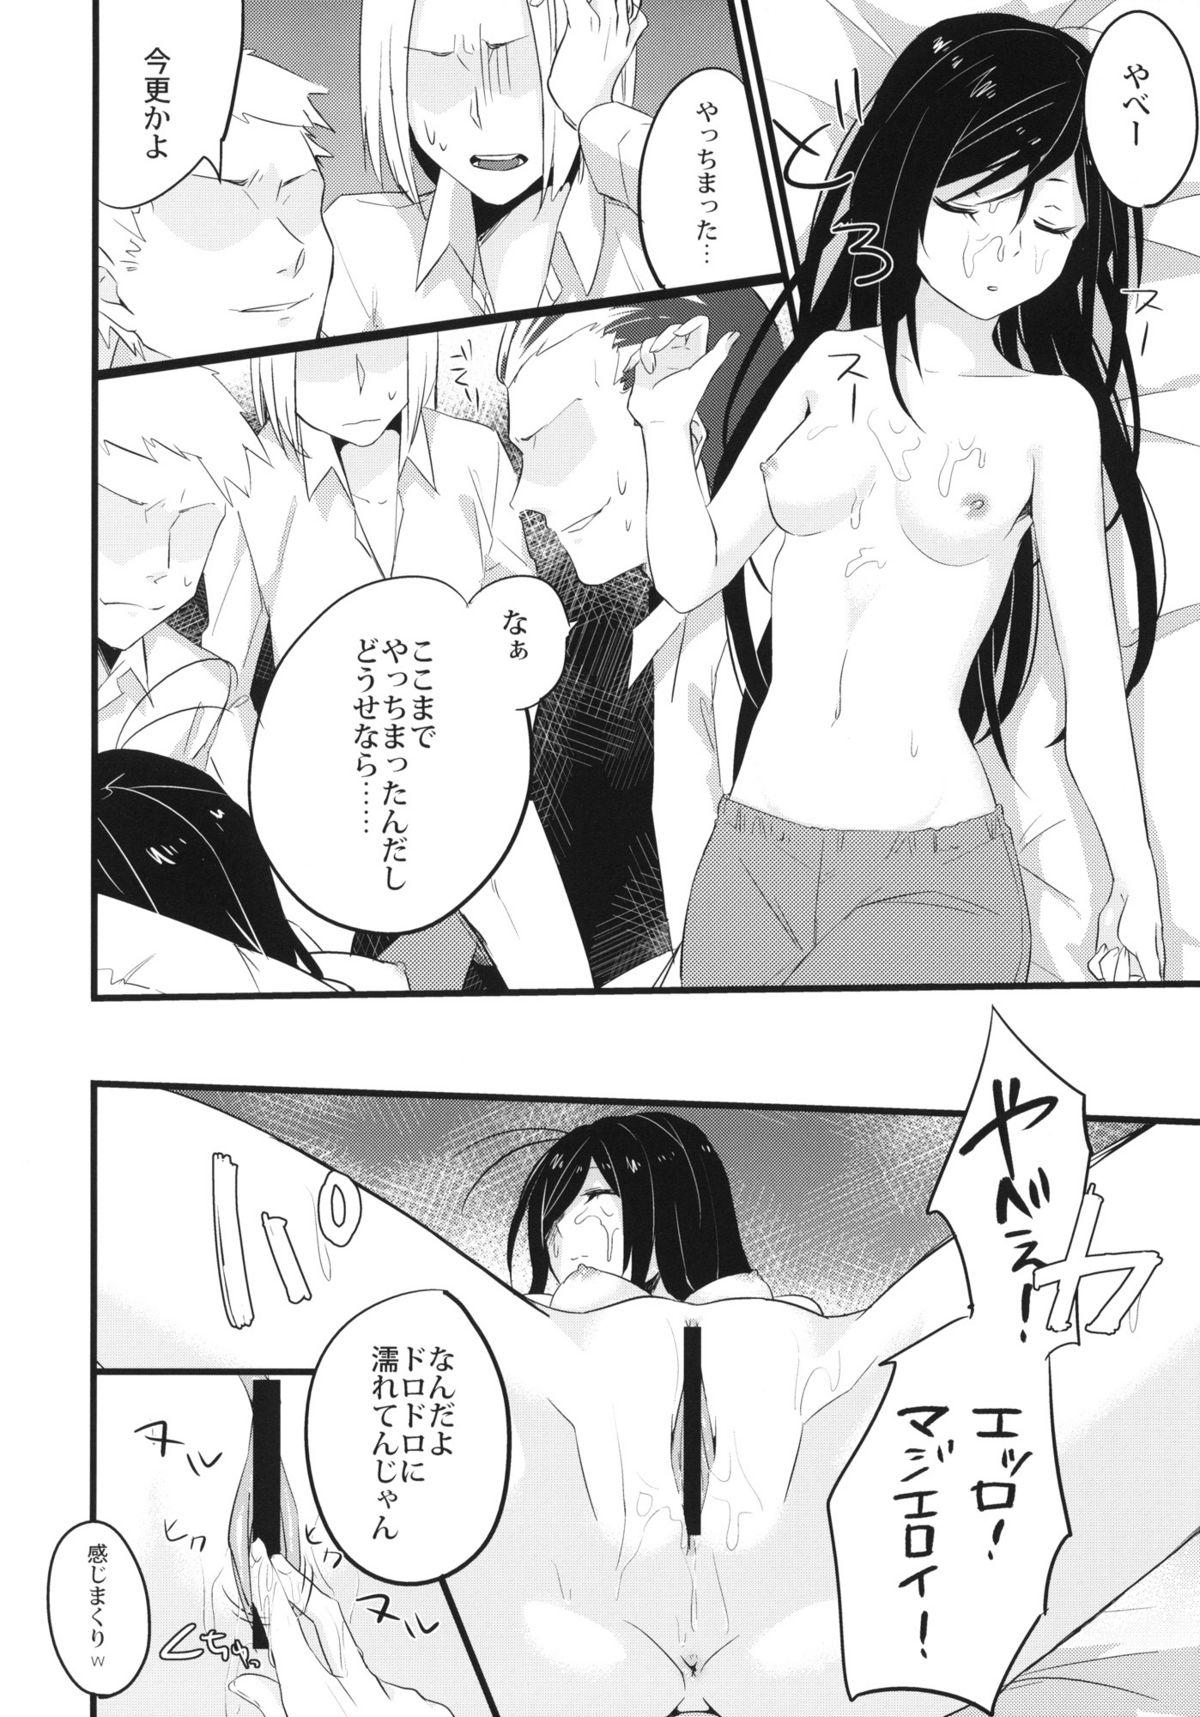 Analfuck stall - Accel world Leather - Page 9